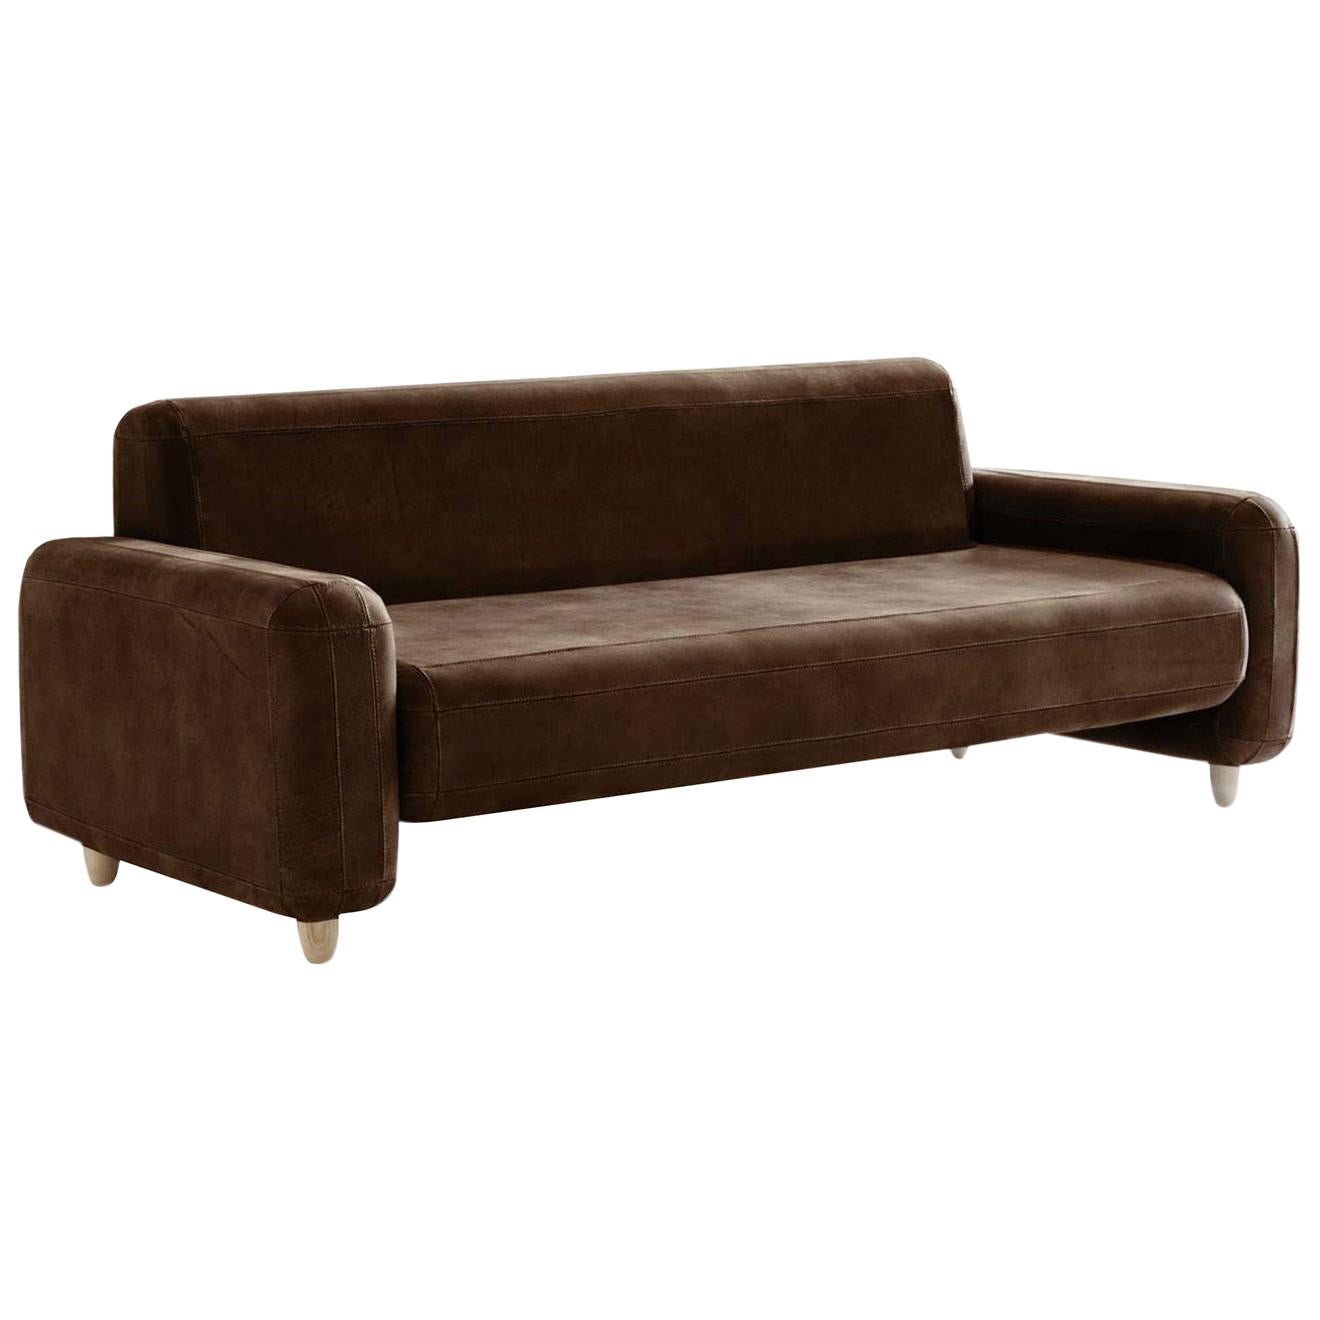 Traco Brown Sofa by Paolo Cappello For Sale